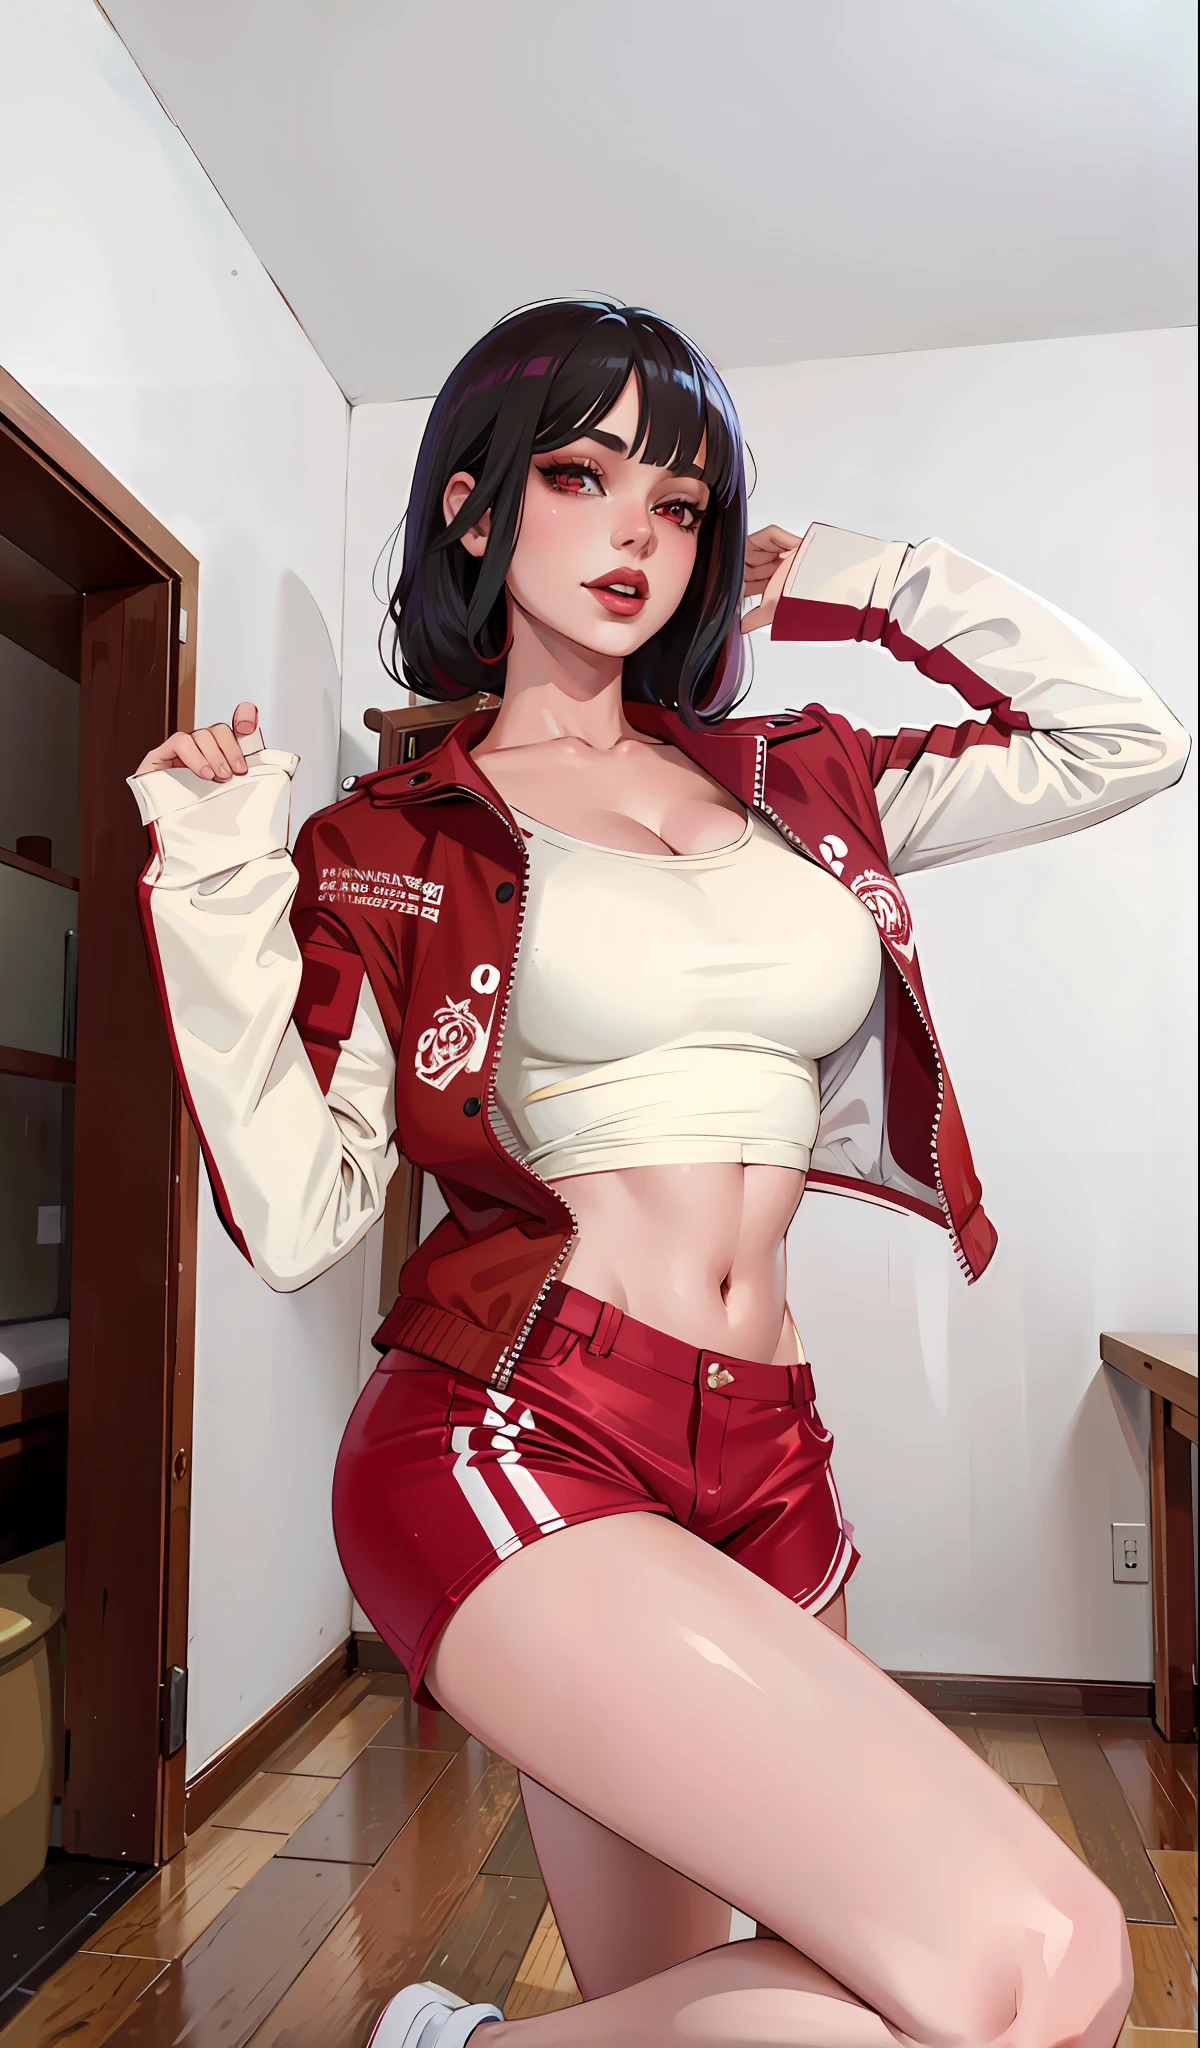 (masterpiece),(best quality:1.0), (ultra highres:1.0), detailed illustration, 8k, anime, 1girl, beautiful anime girl, wearing a red jacket, white crop top, red shorts, posing, pretty face, detailed face, beautiful eyes, detailed eyes, dark red eyes, bright red lips, red lipstick, beautiful stylish hair, highlights in hair, bangs anime style, best quality, vibrant